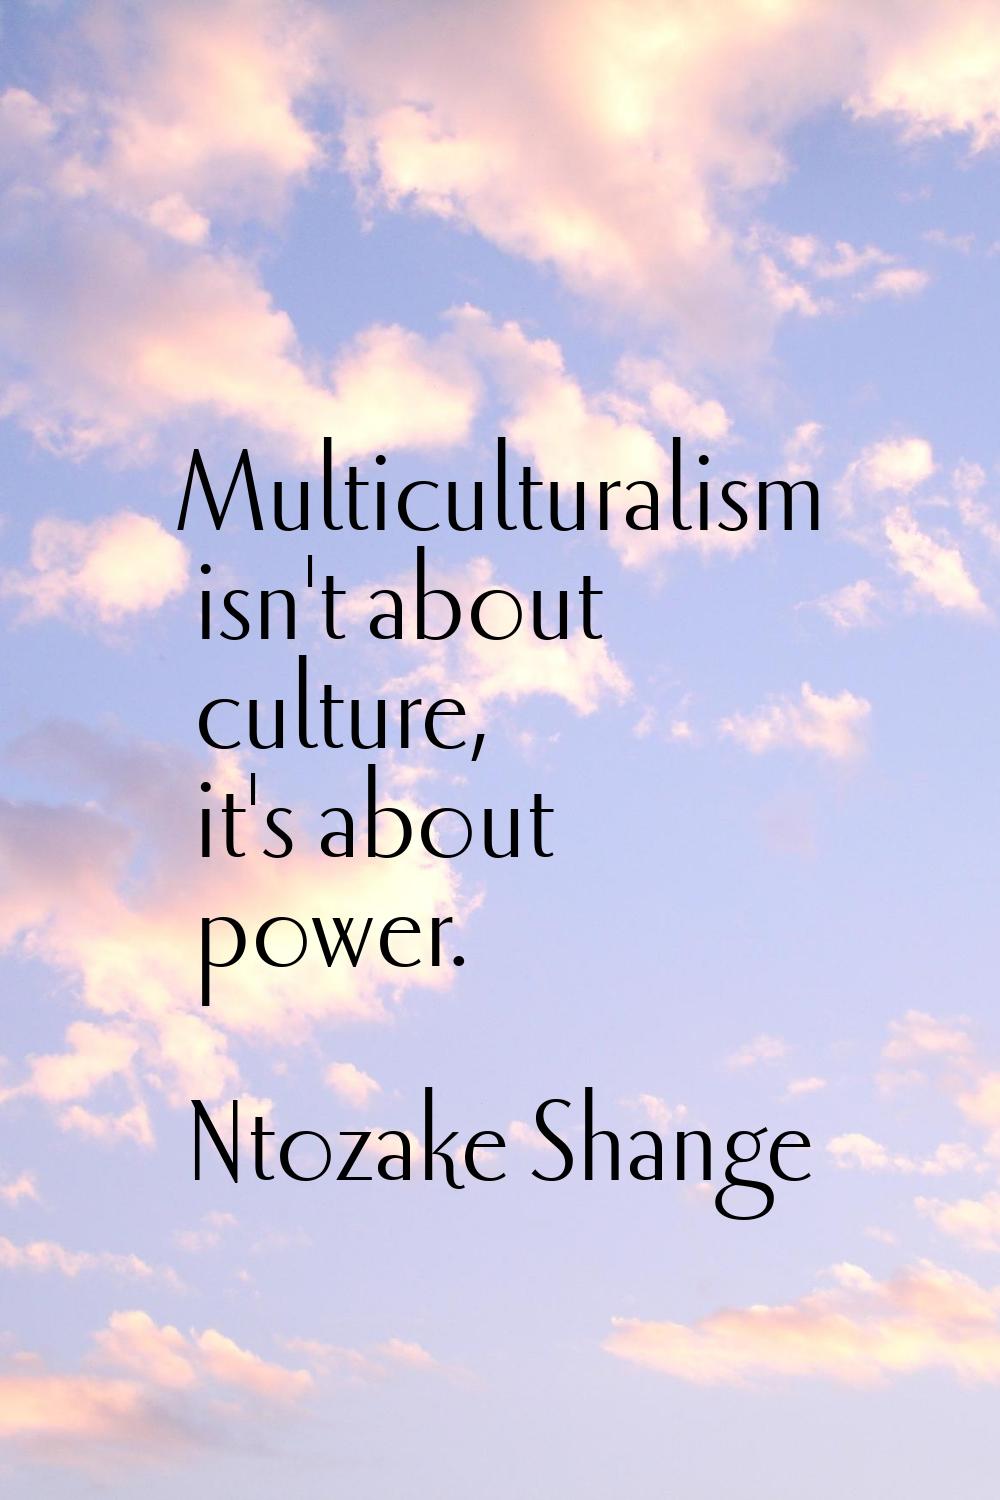 Multiculturalism isn't about culture, it's about power.